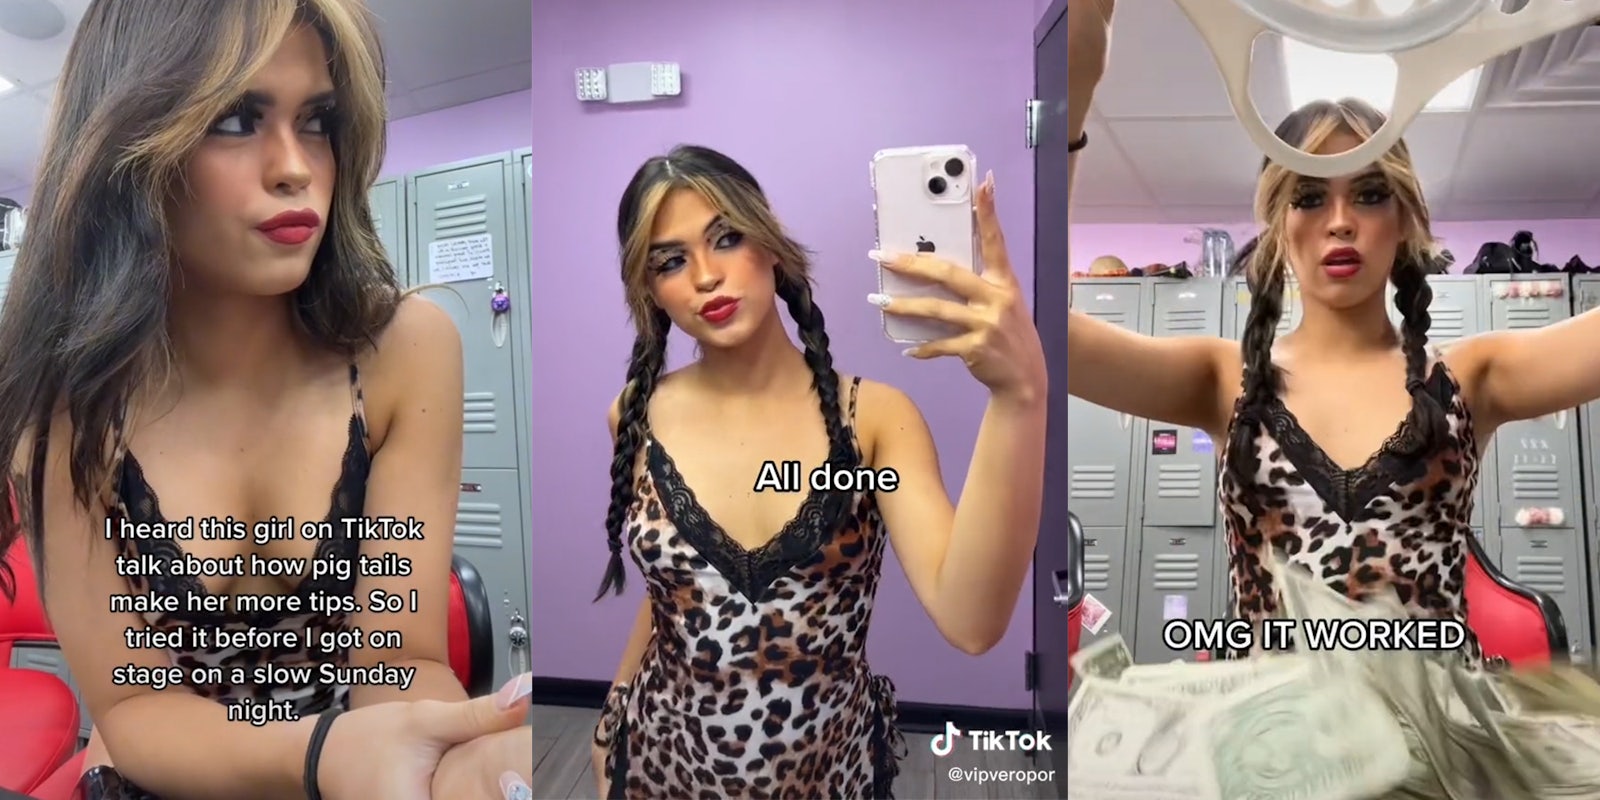 young woman in locker room with caption 'I heard this girl on TikTok talk about how pig tails make her more tips. So I tried it before I got on stage on a slow Sunday night.' (l) young woman in pigtails holding up phone with caption 'All done' (c) young woman dumping money from basket onto table with caption 'OMG IT WORKED' (r)